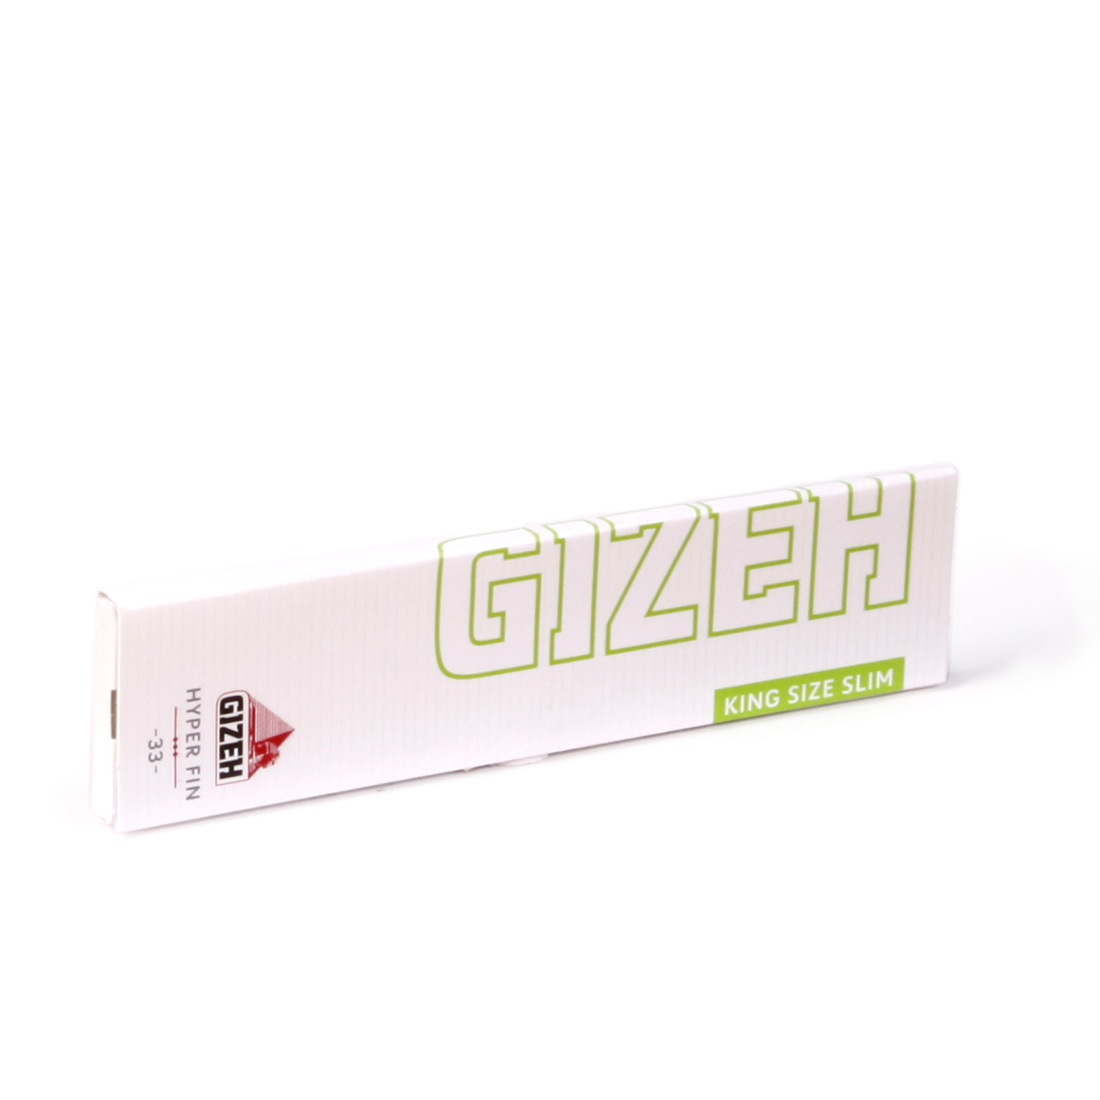 Feuille a rouler Gizeh Slim Extra Fin x 1 - 0,90€